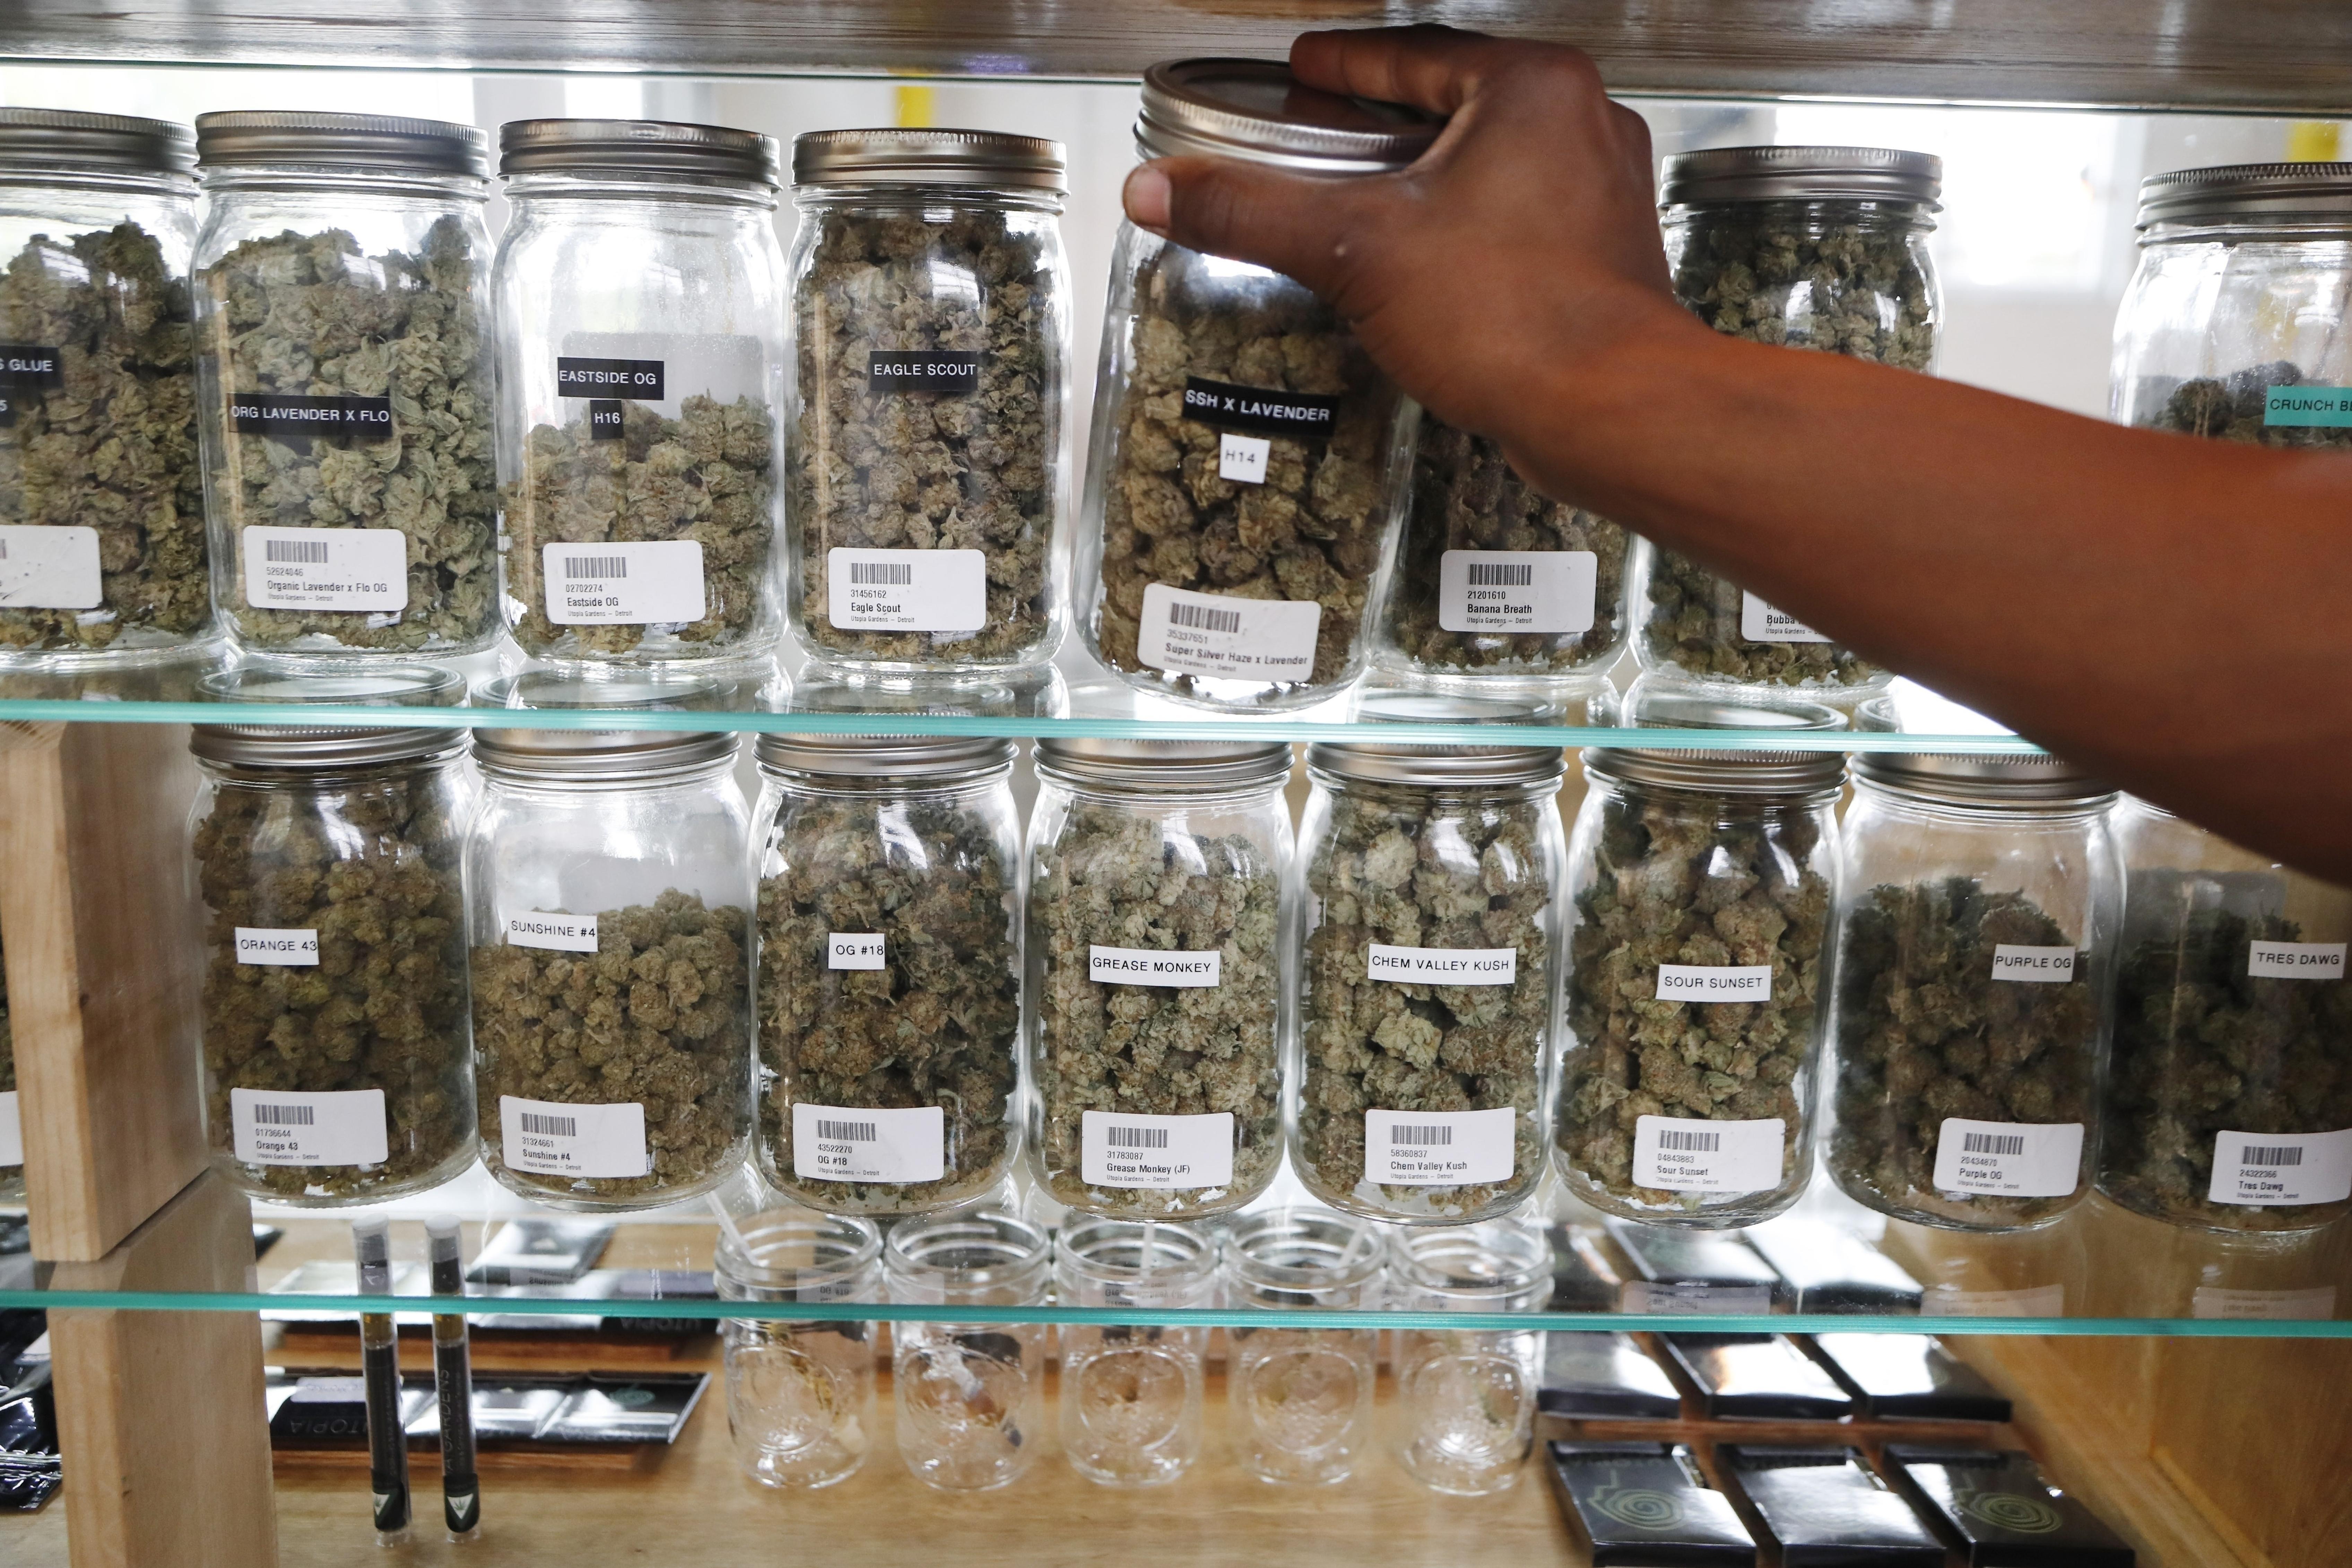 Michigan's recreational marijuana market is expected to be in line with Colorado and Nevada's by 2023, according to a report from the Chicago-based Brightfield Group.